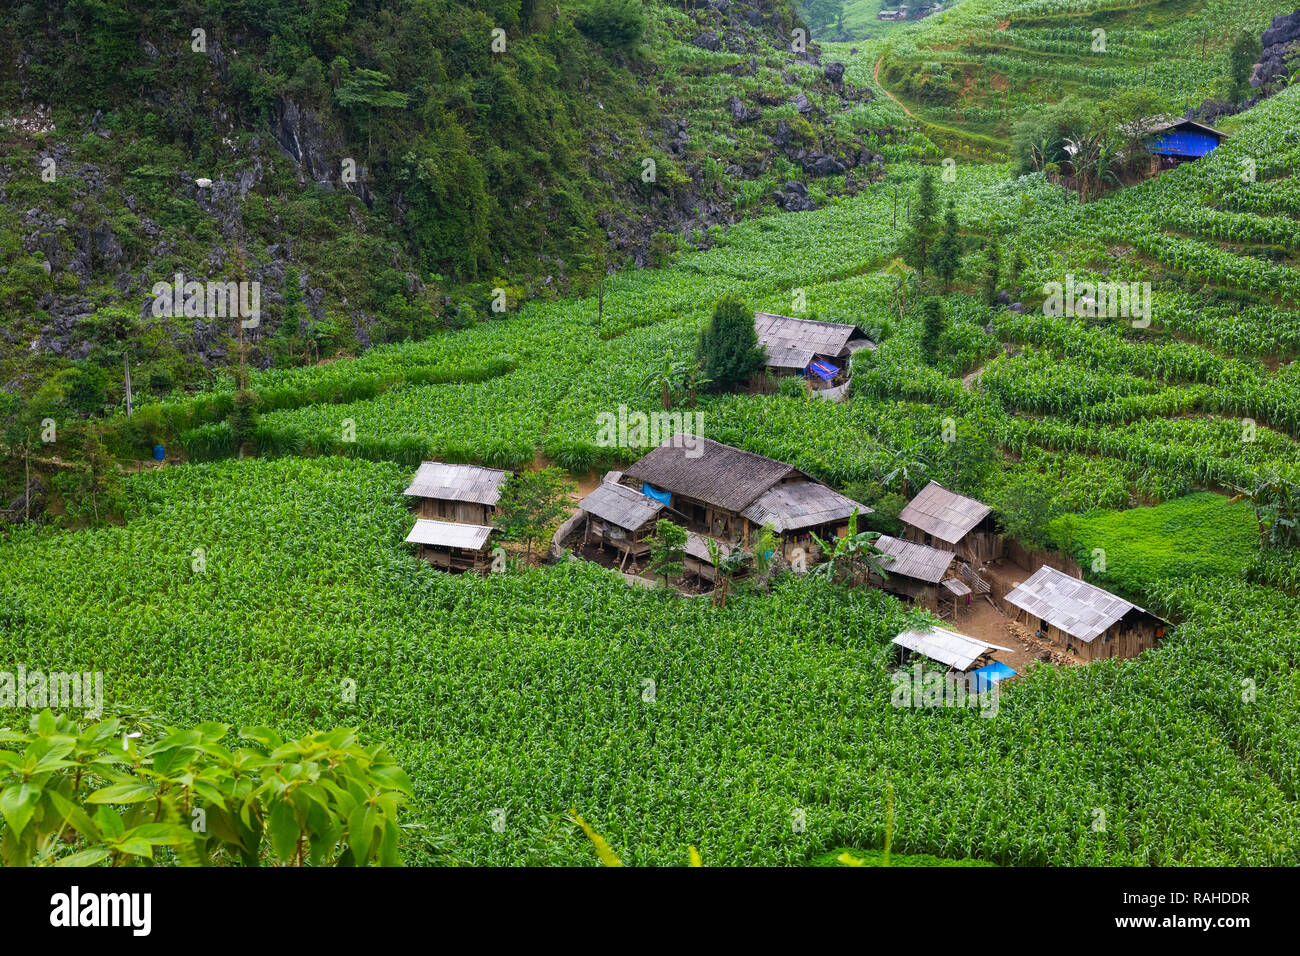 Small mountain village surrounded by a field of corn.Ha Giang Loop, Ha Giang Province, Vietnam, Asia Stock Photo